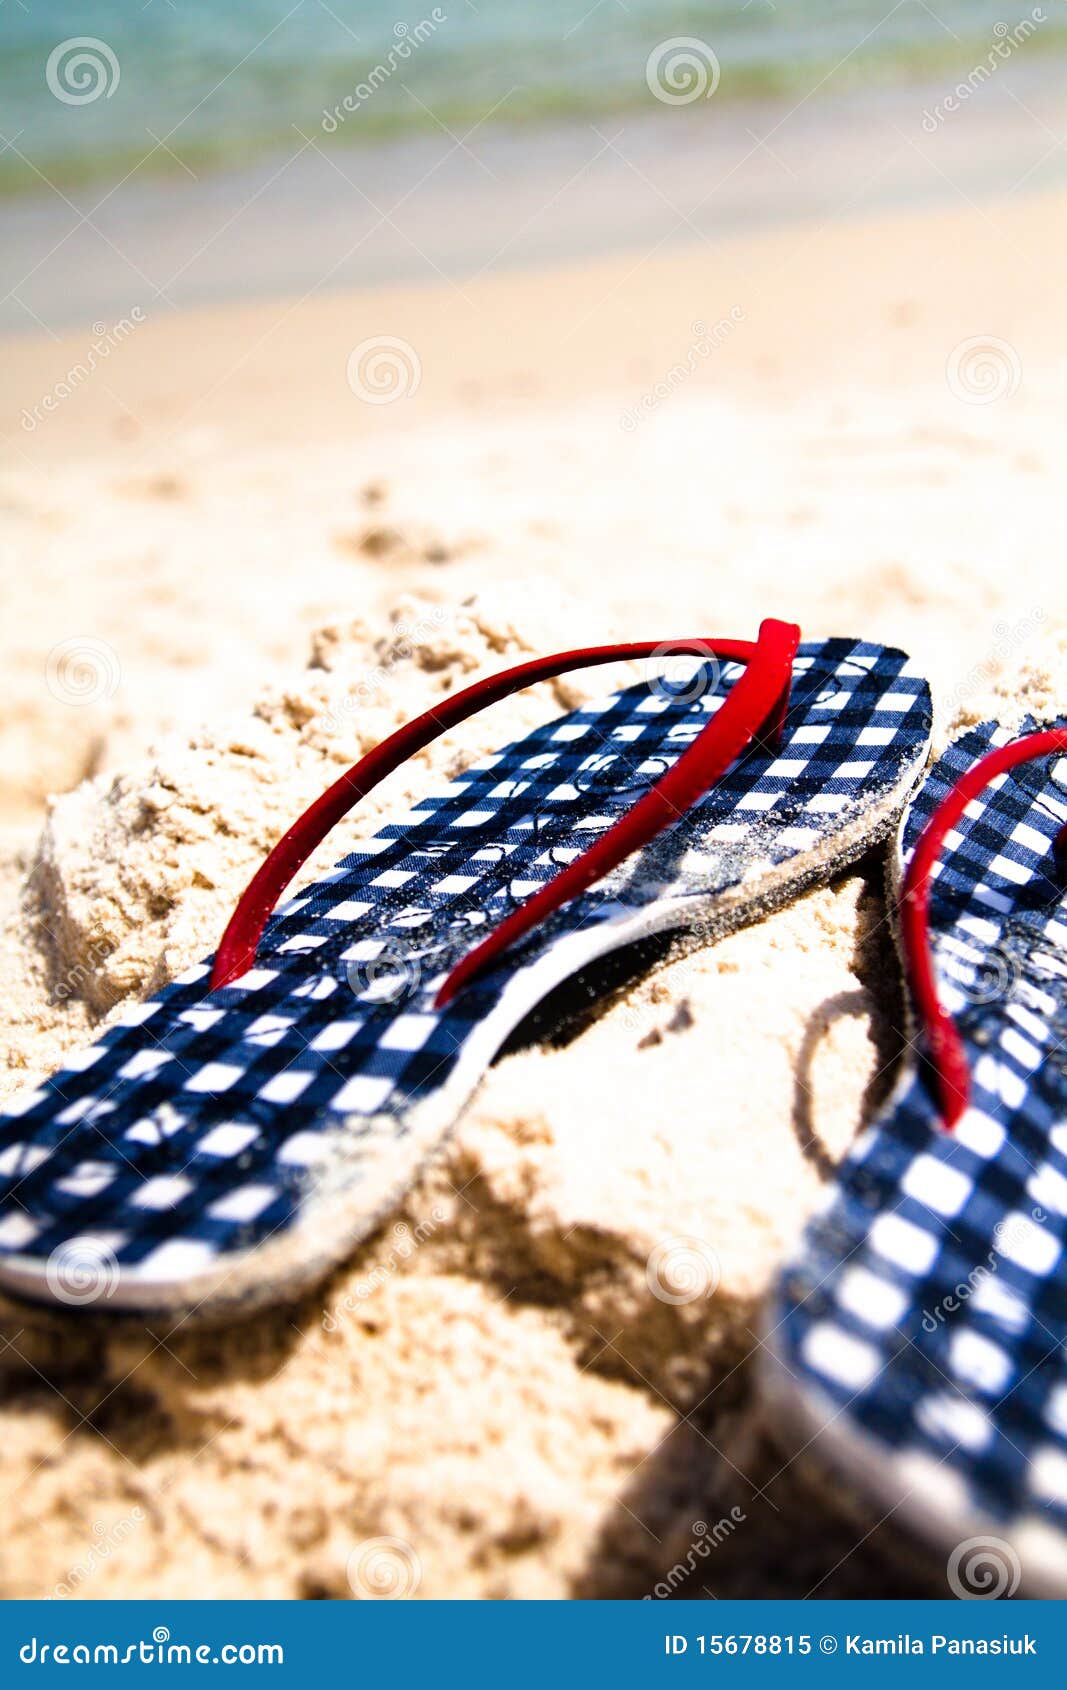 checked flip-flops on the beach